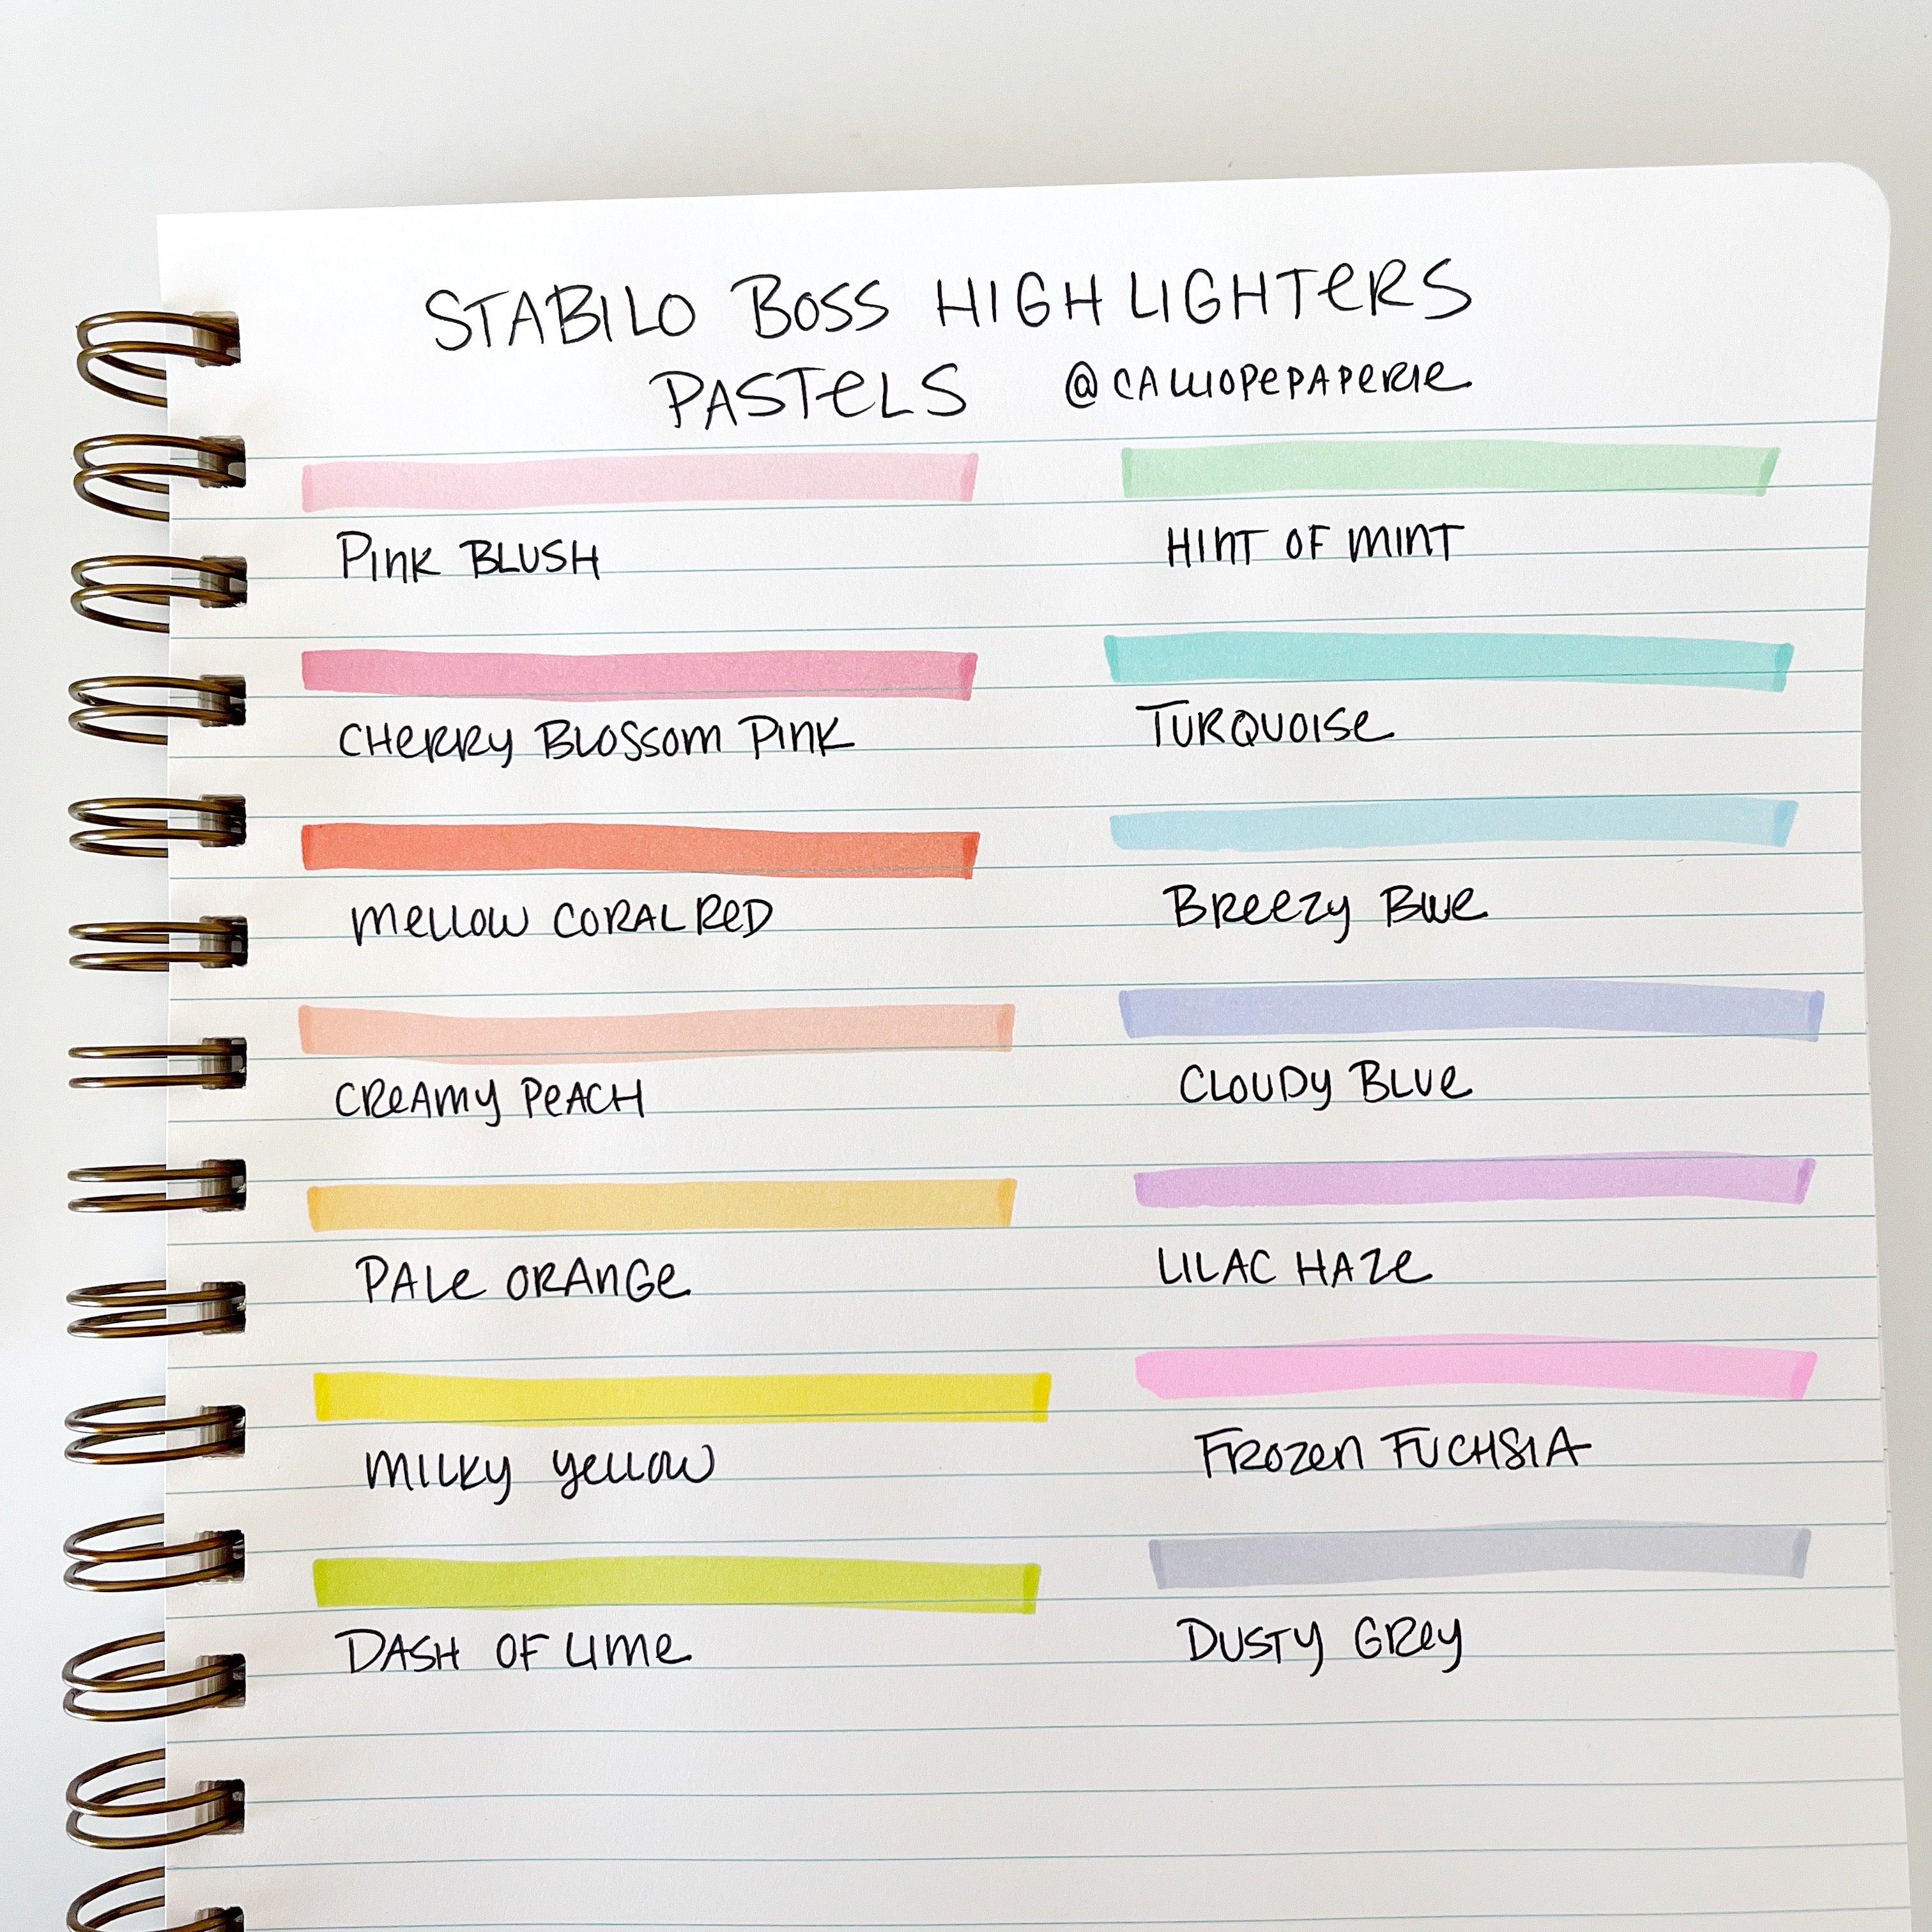 Stabilo BOSS Highlighters - Pastel – Calliope Paperie